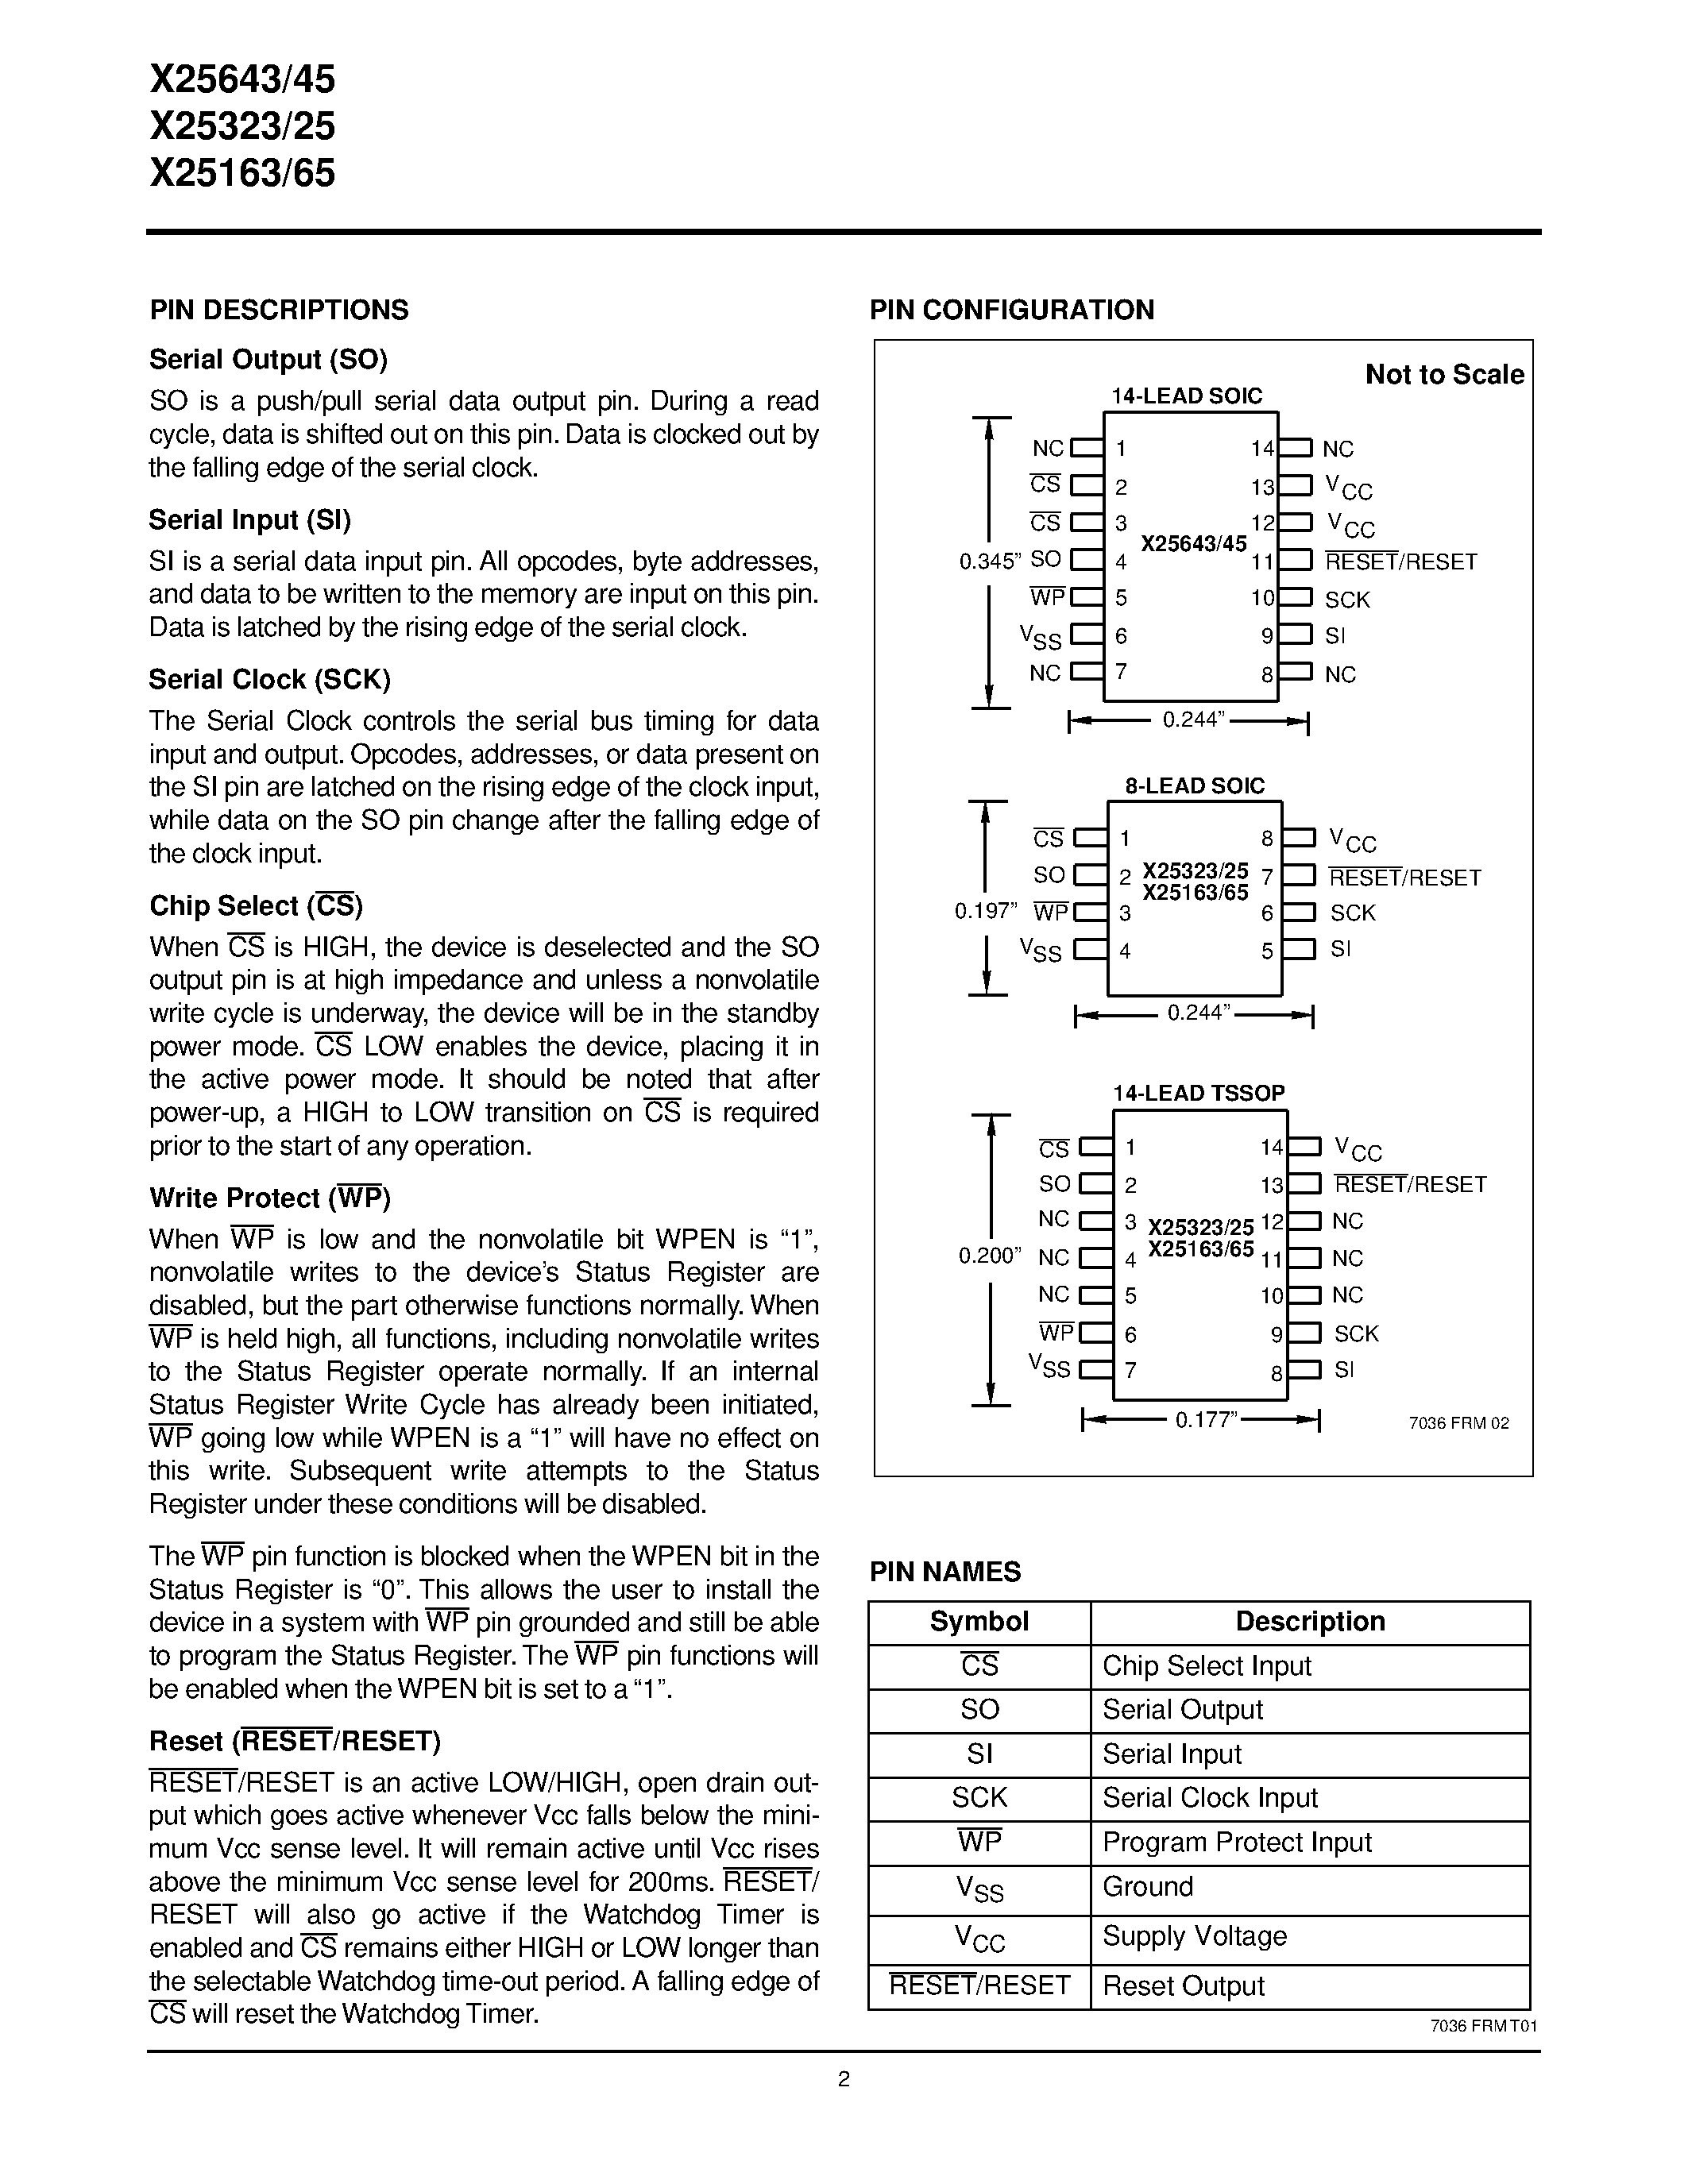 Datasheet X25325S14-1.8 - Programmable Watchdog Timer & V CC Supervisory Circuit w/Serial E 2 PROM page 2